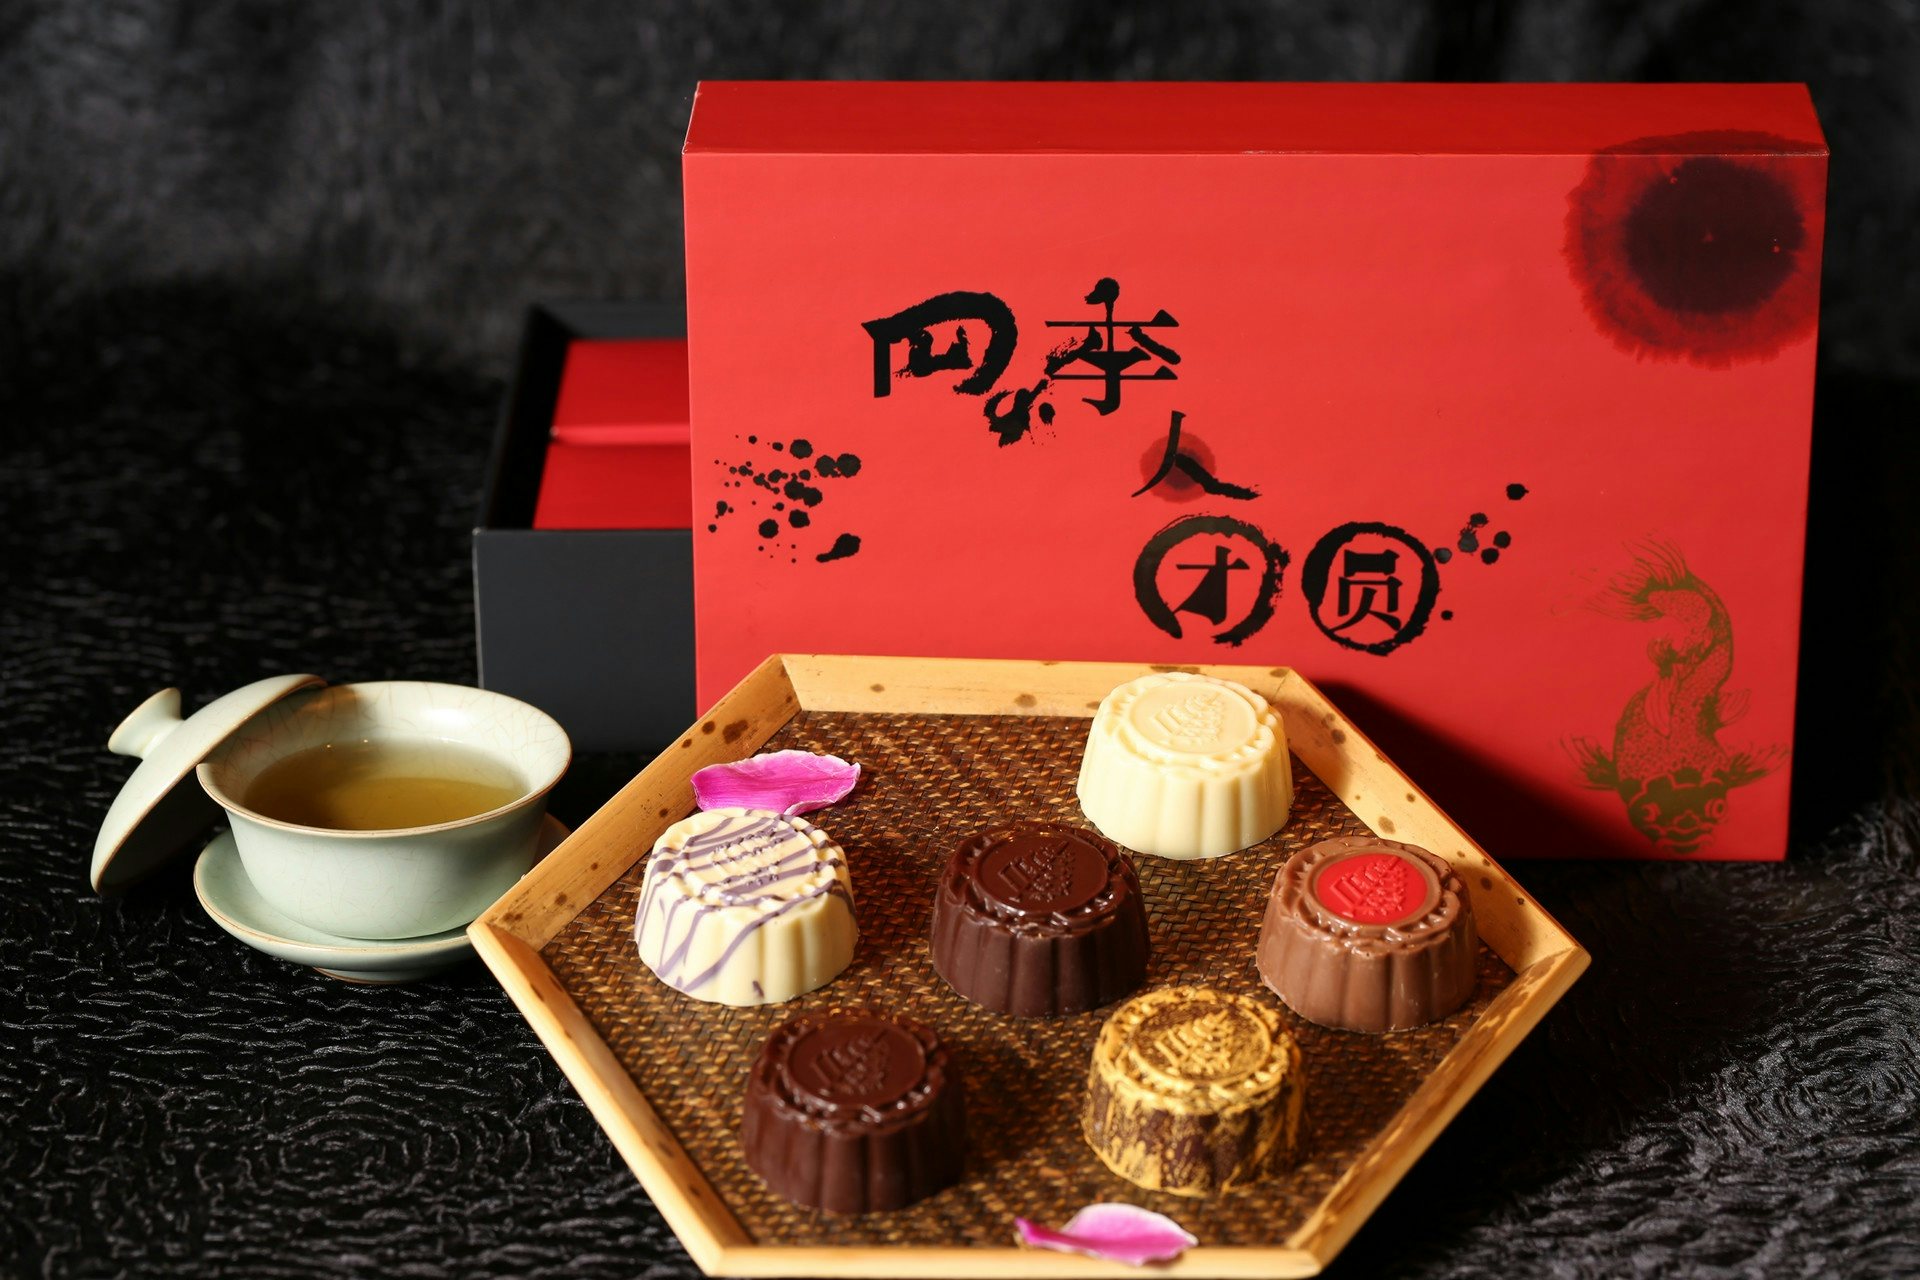 Four Seasons Beijing offered three new flavors in its Valrhona Chocolate Mooncake package this year. (Courtesy Photo)